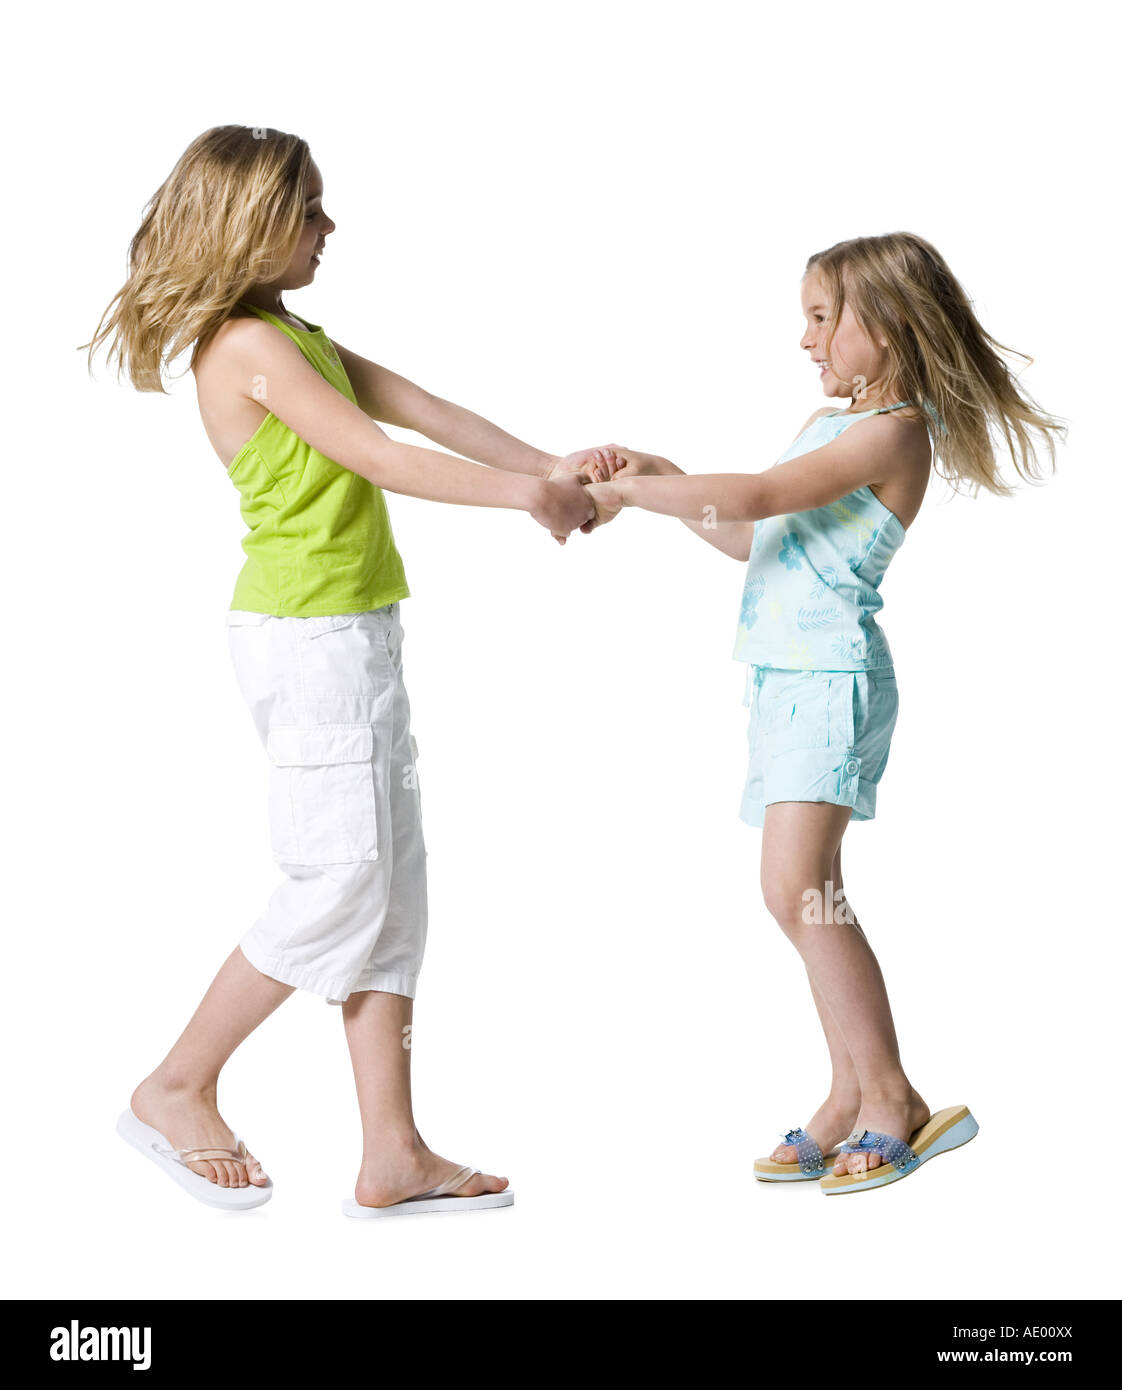 Girls dancing and holding hands Stock Photo